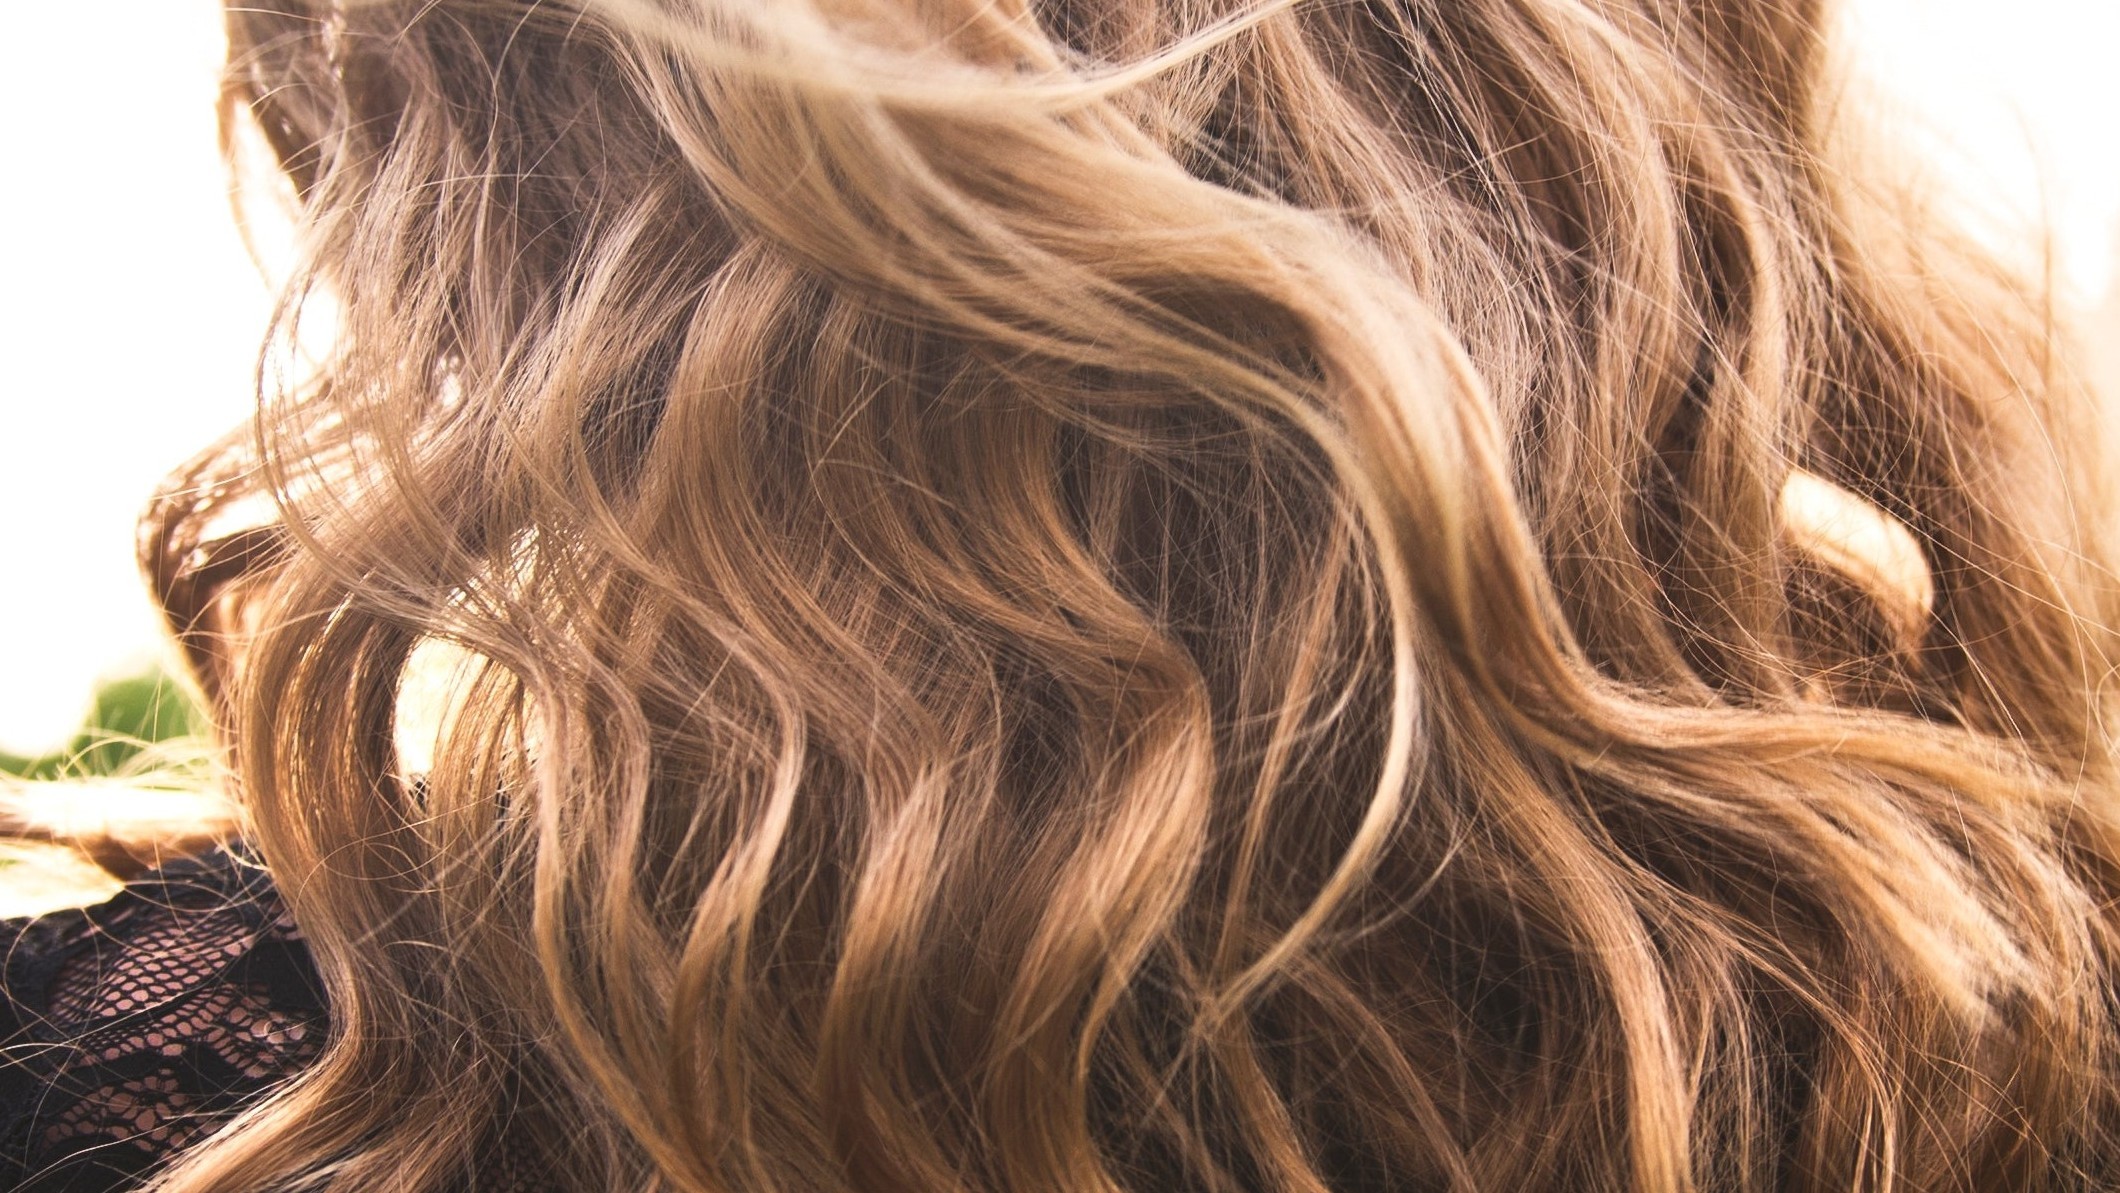 Wavy Hair Routines: 5 Routines For Wavy Hair